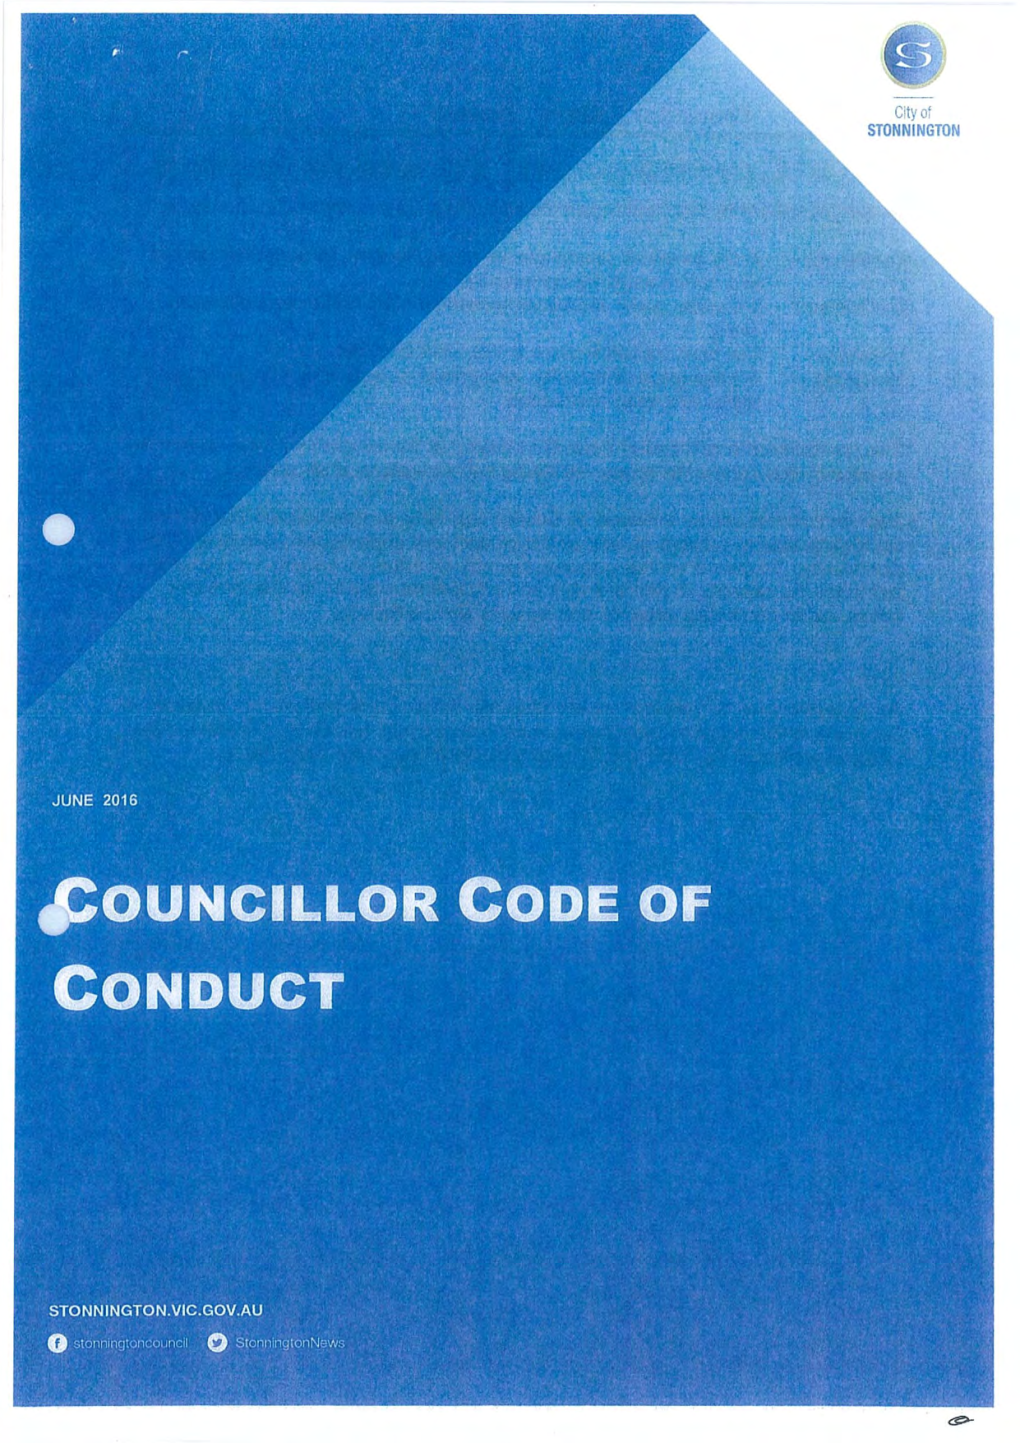 City of Stonnington Councillor Code of Conduct